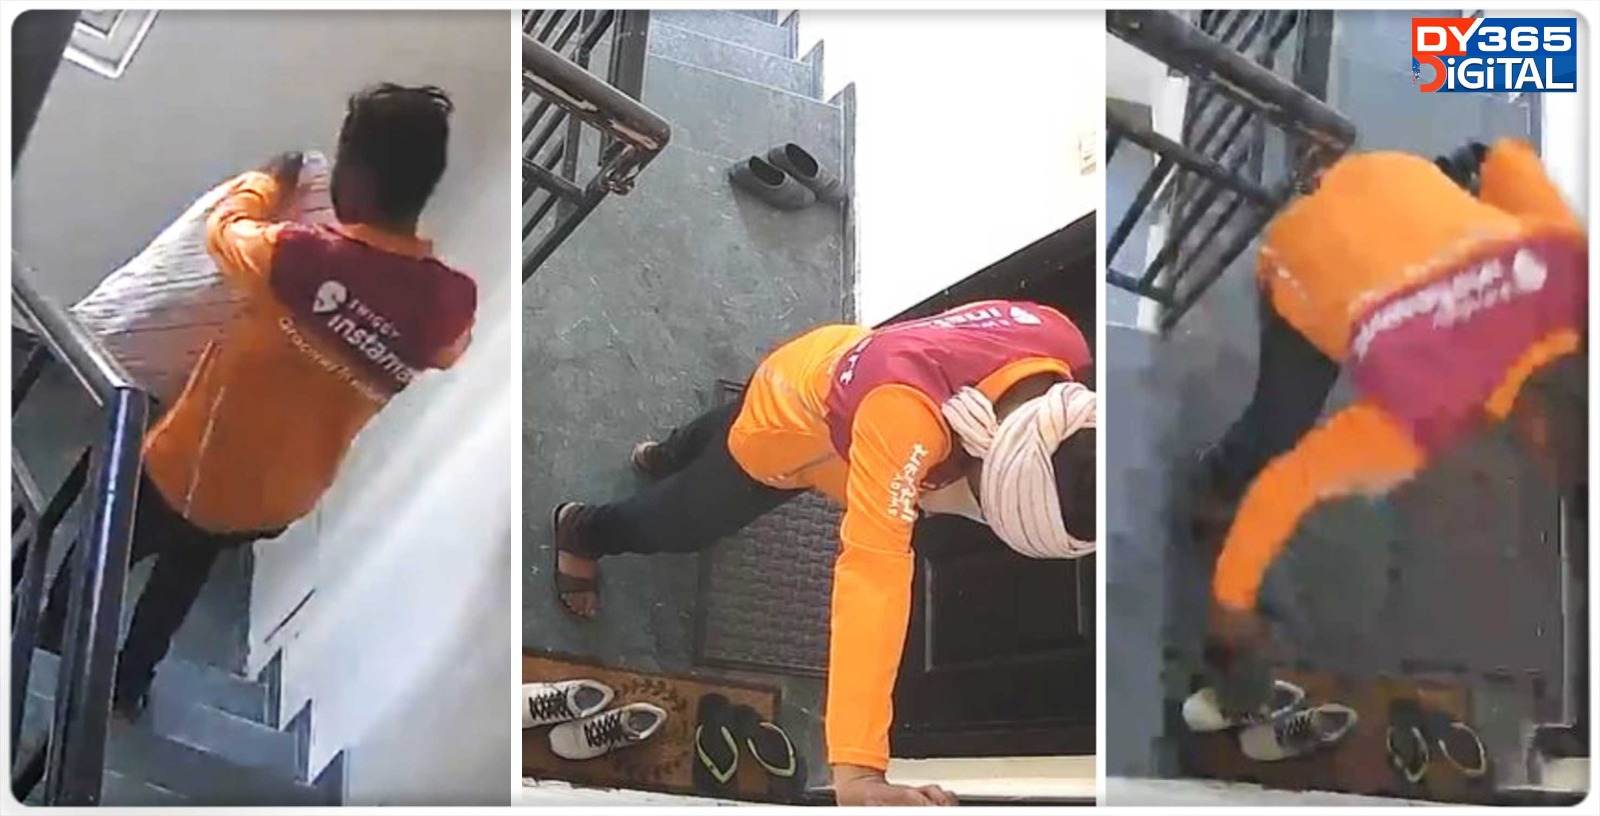 swiggy-delivery-man-caught-on-tape-stealing-shoes-from-customer-watch-video